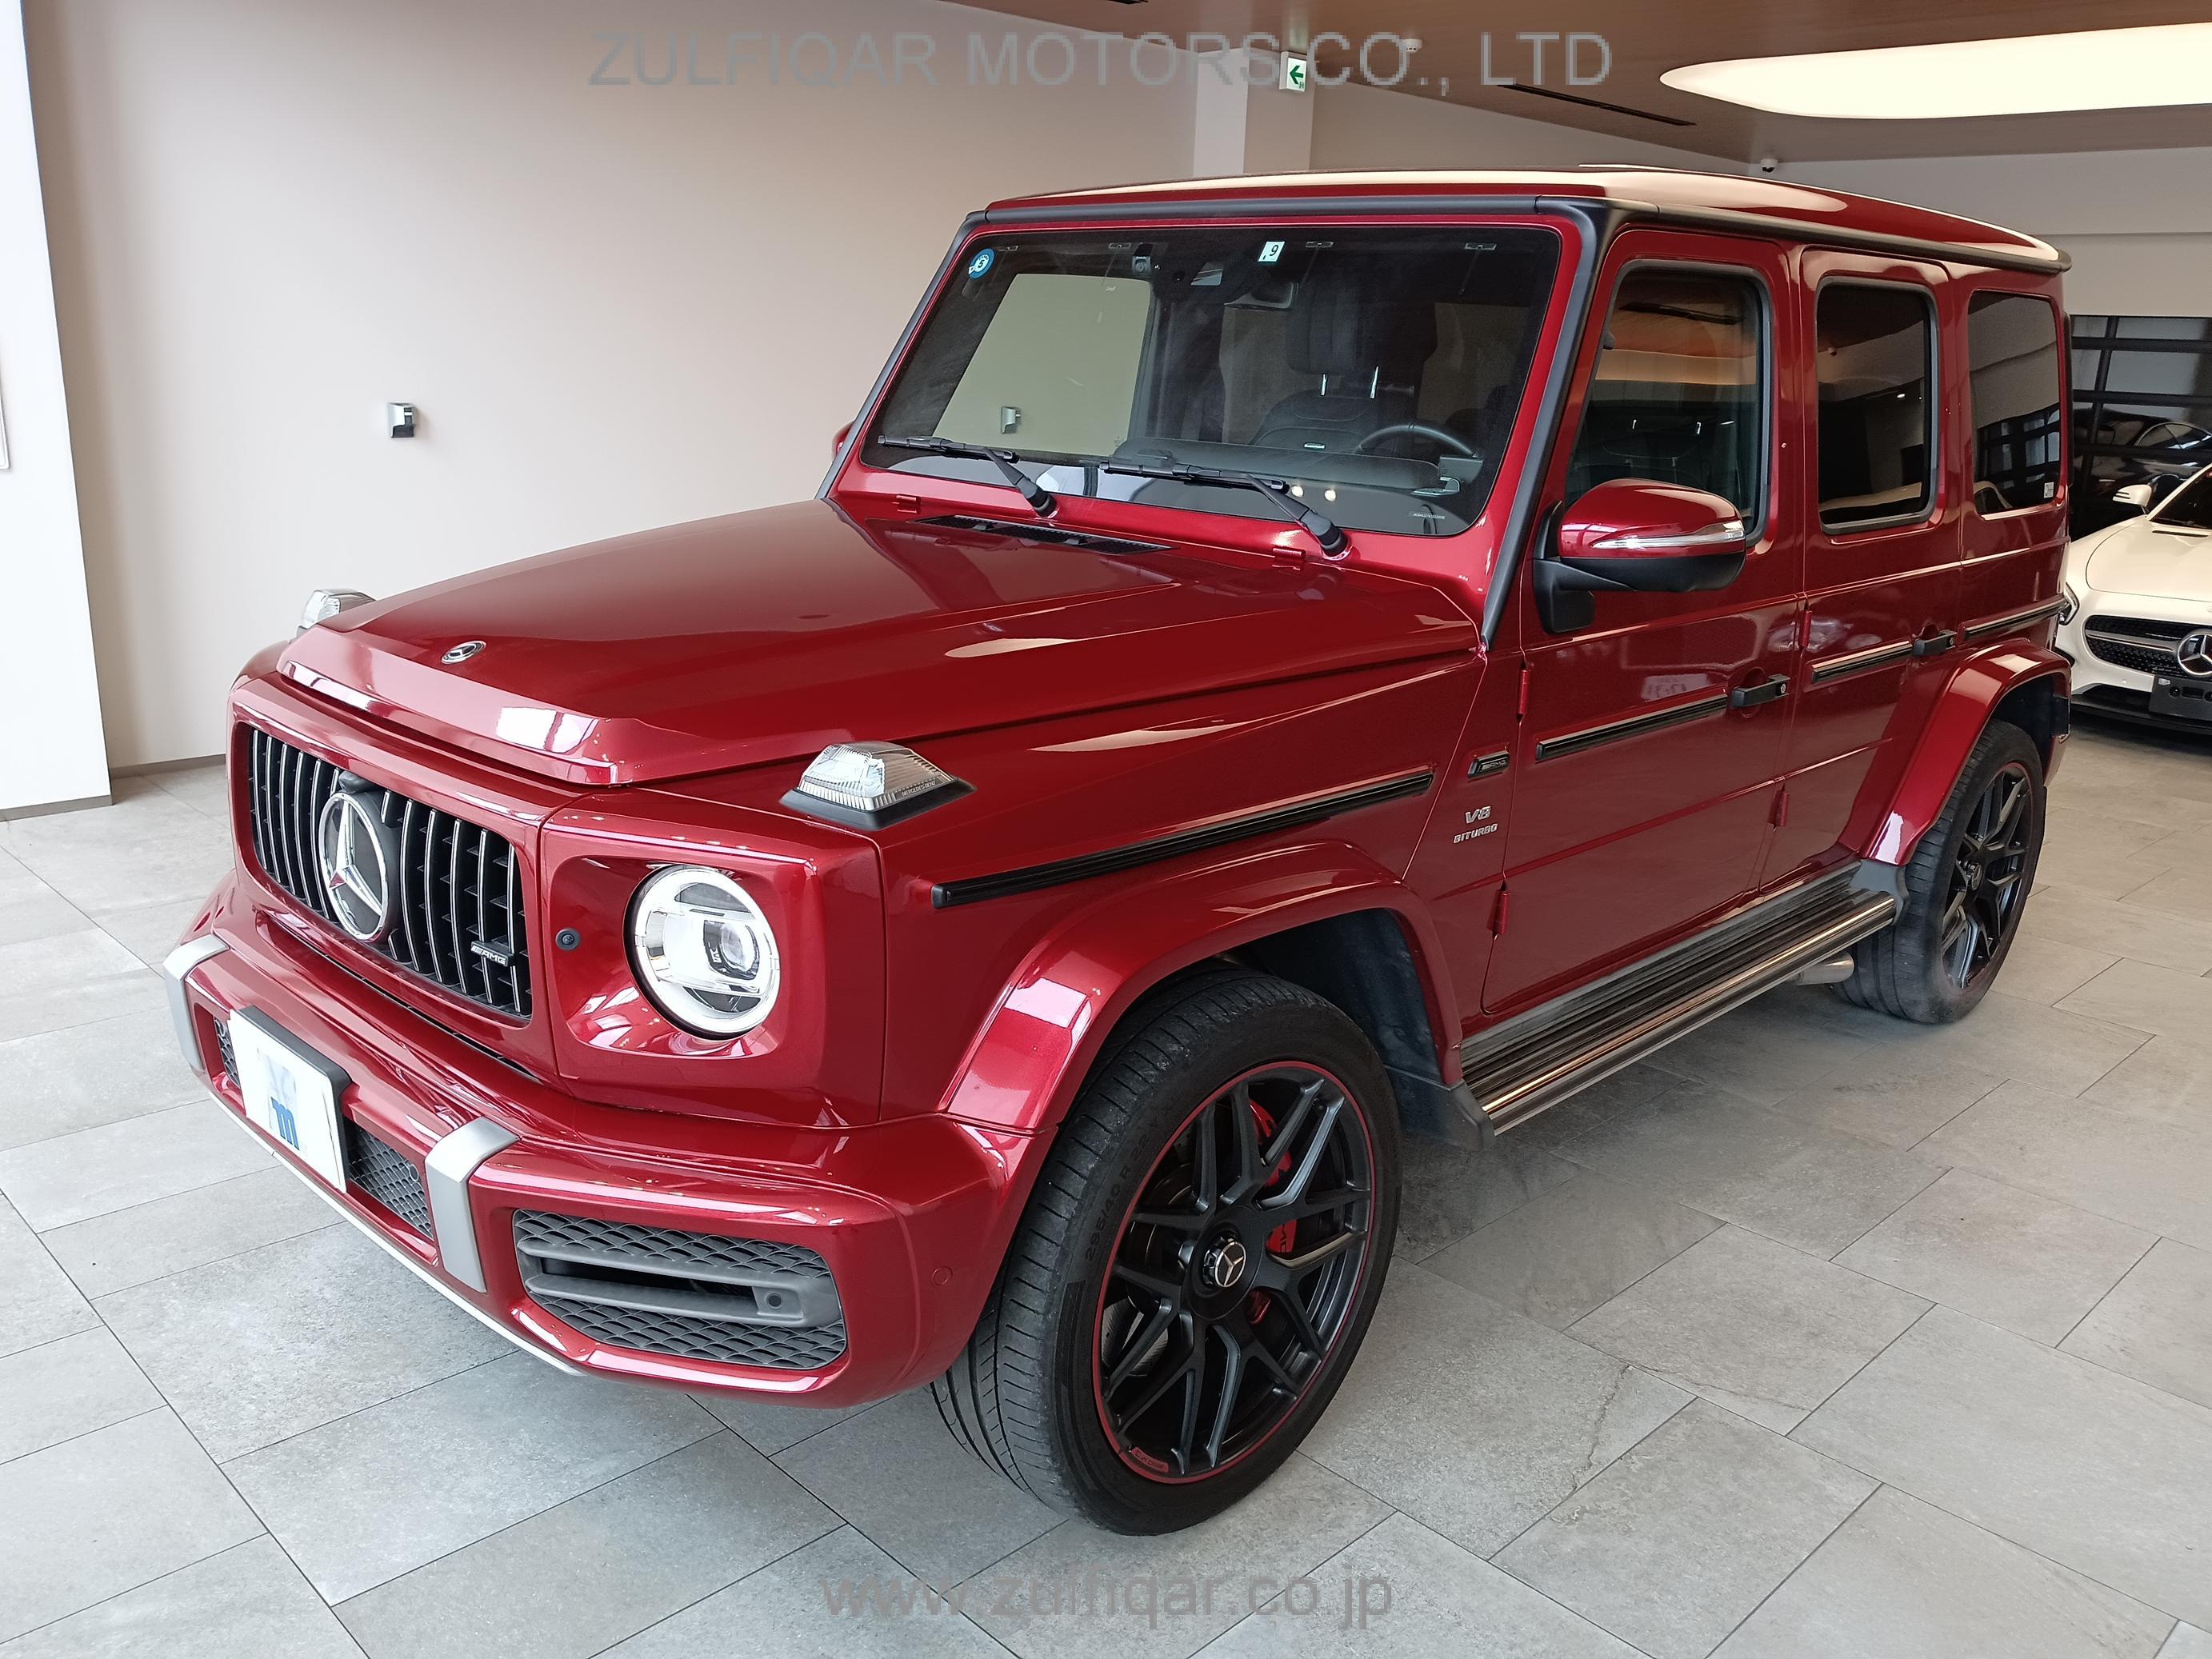 MERCEDES AMG G CLASS 2019 Image 1